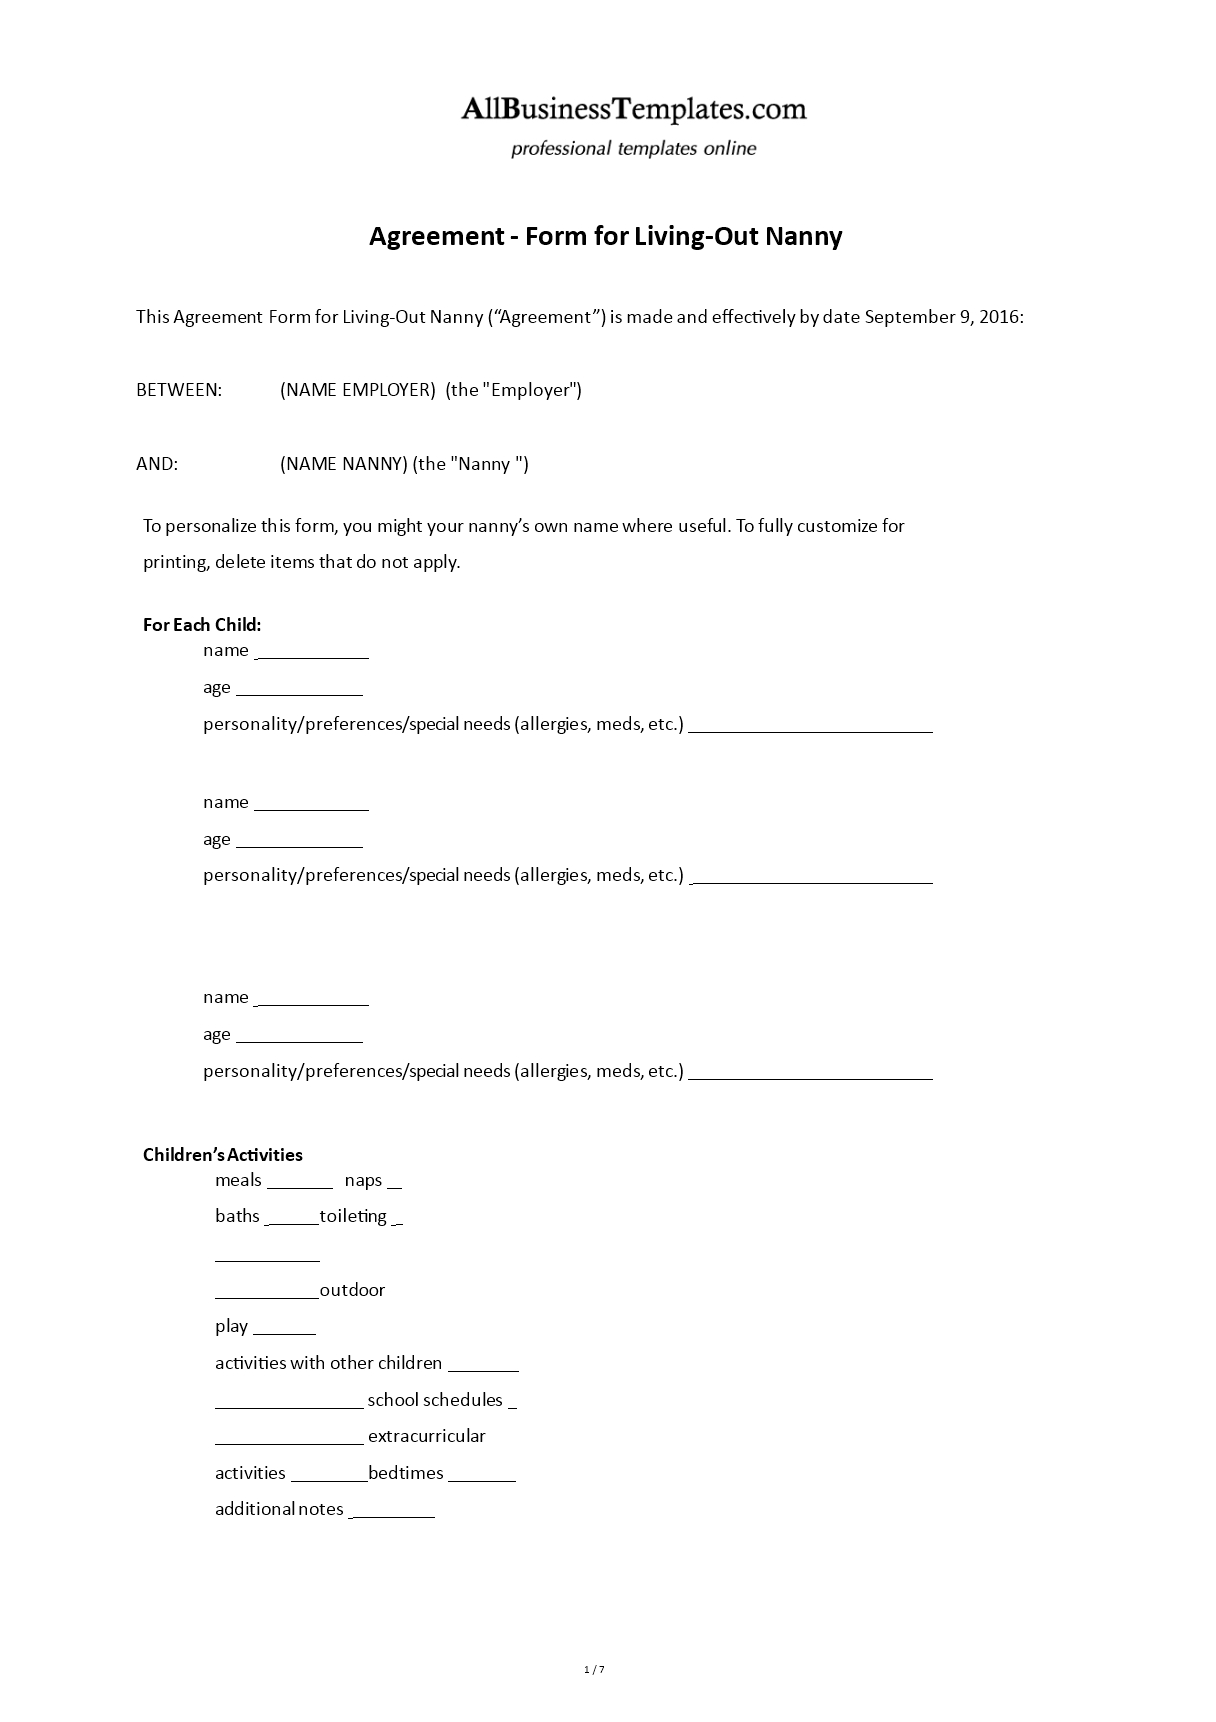 Contract Form For Living Out Nanny | Templates At Inside Nanny Contract Template Word